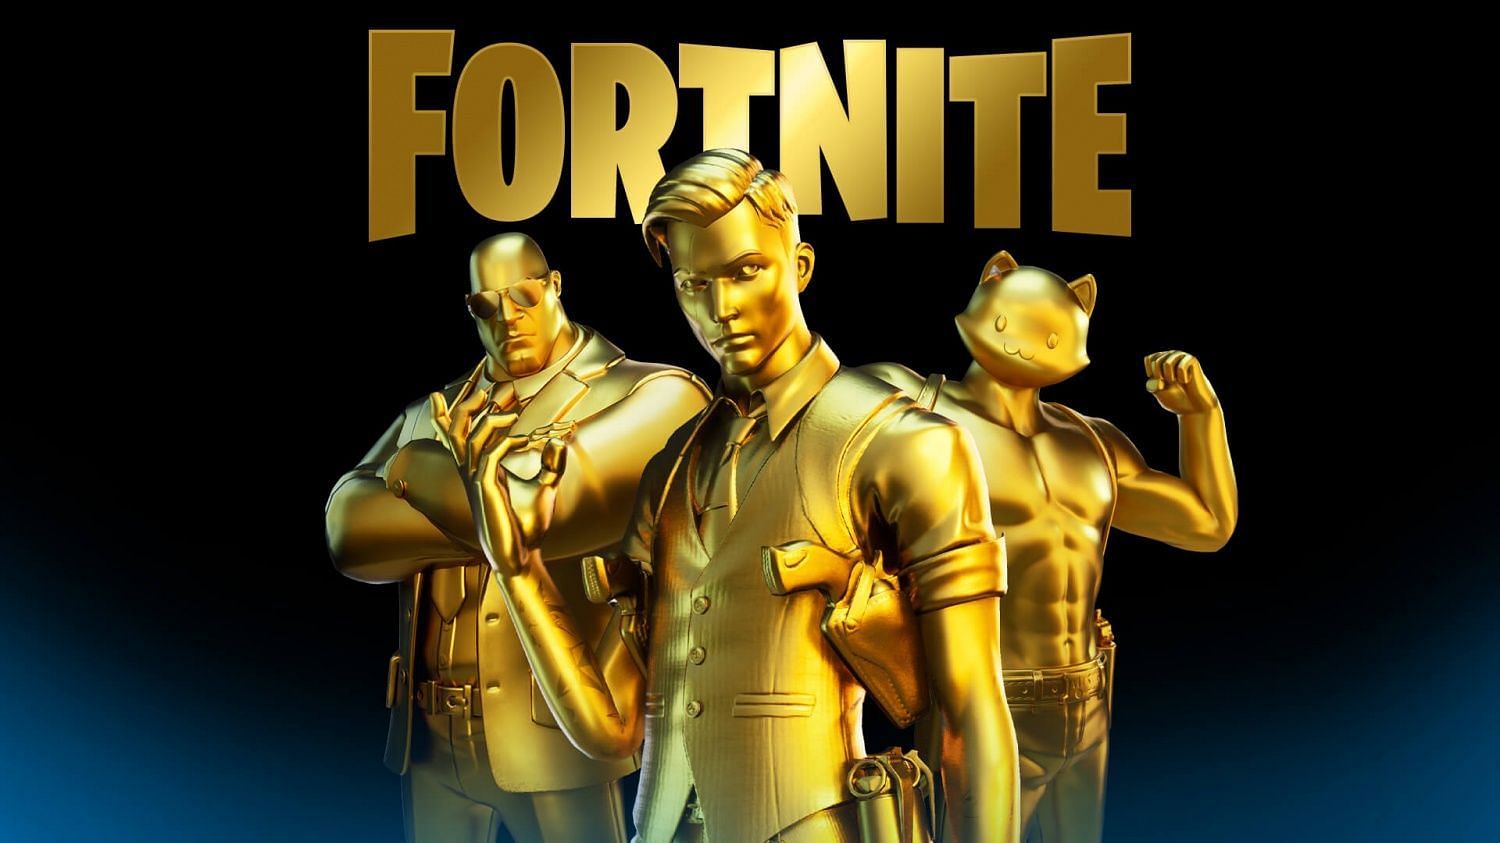 Recent Fortnite glitch using Gold Skins crashes computers of players who see it (Image via Sportskeeda)